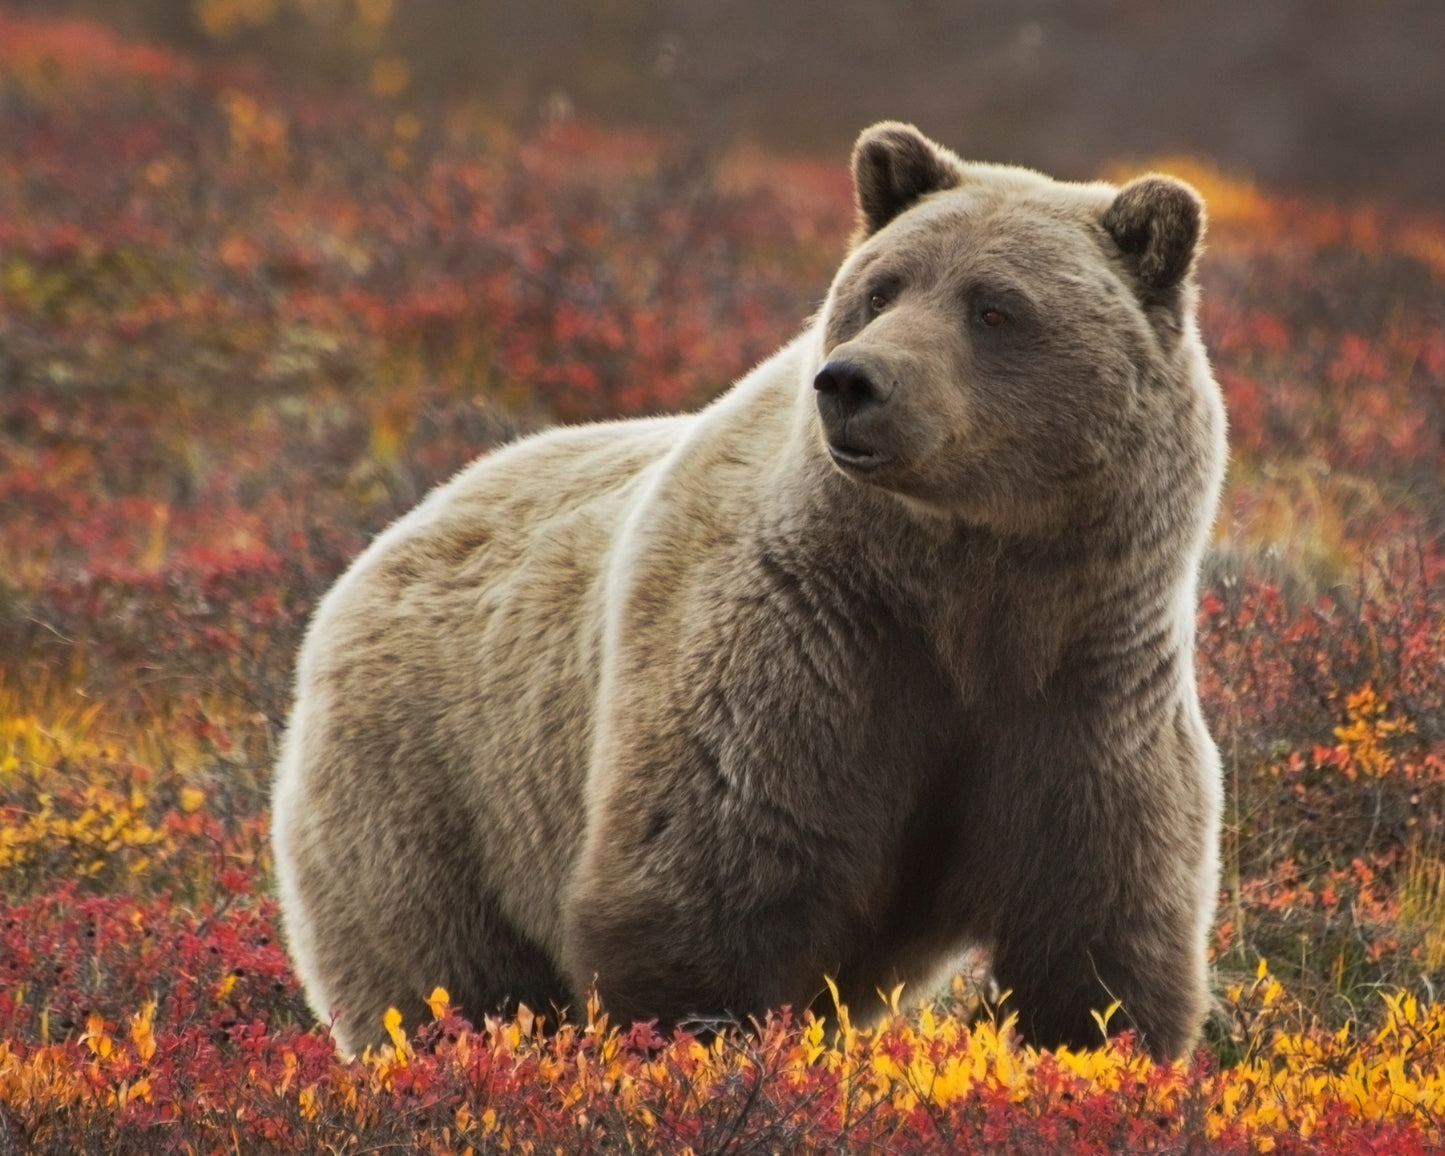 GRIZZLY BEAR MALE IN FALL FOLIAGE 3D LENTICULAR MAGNET 2.75" X 3.5"